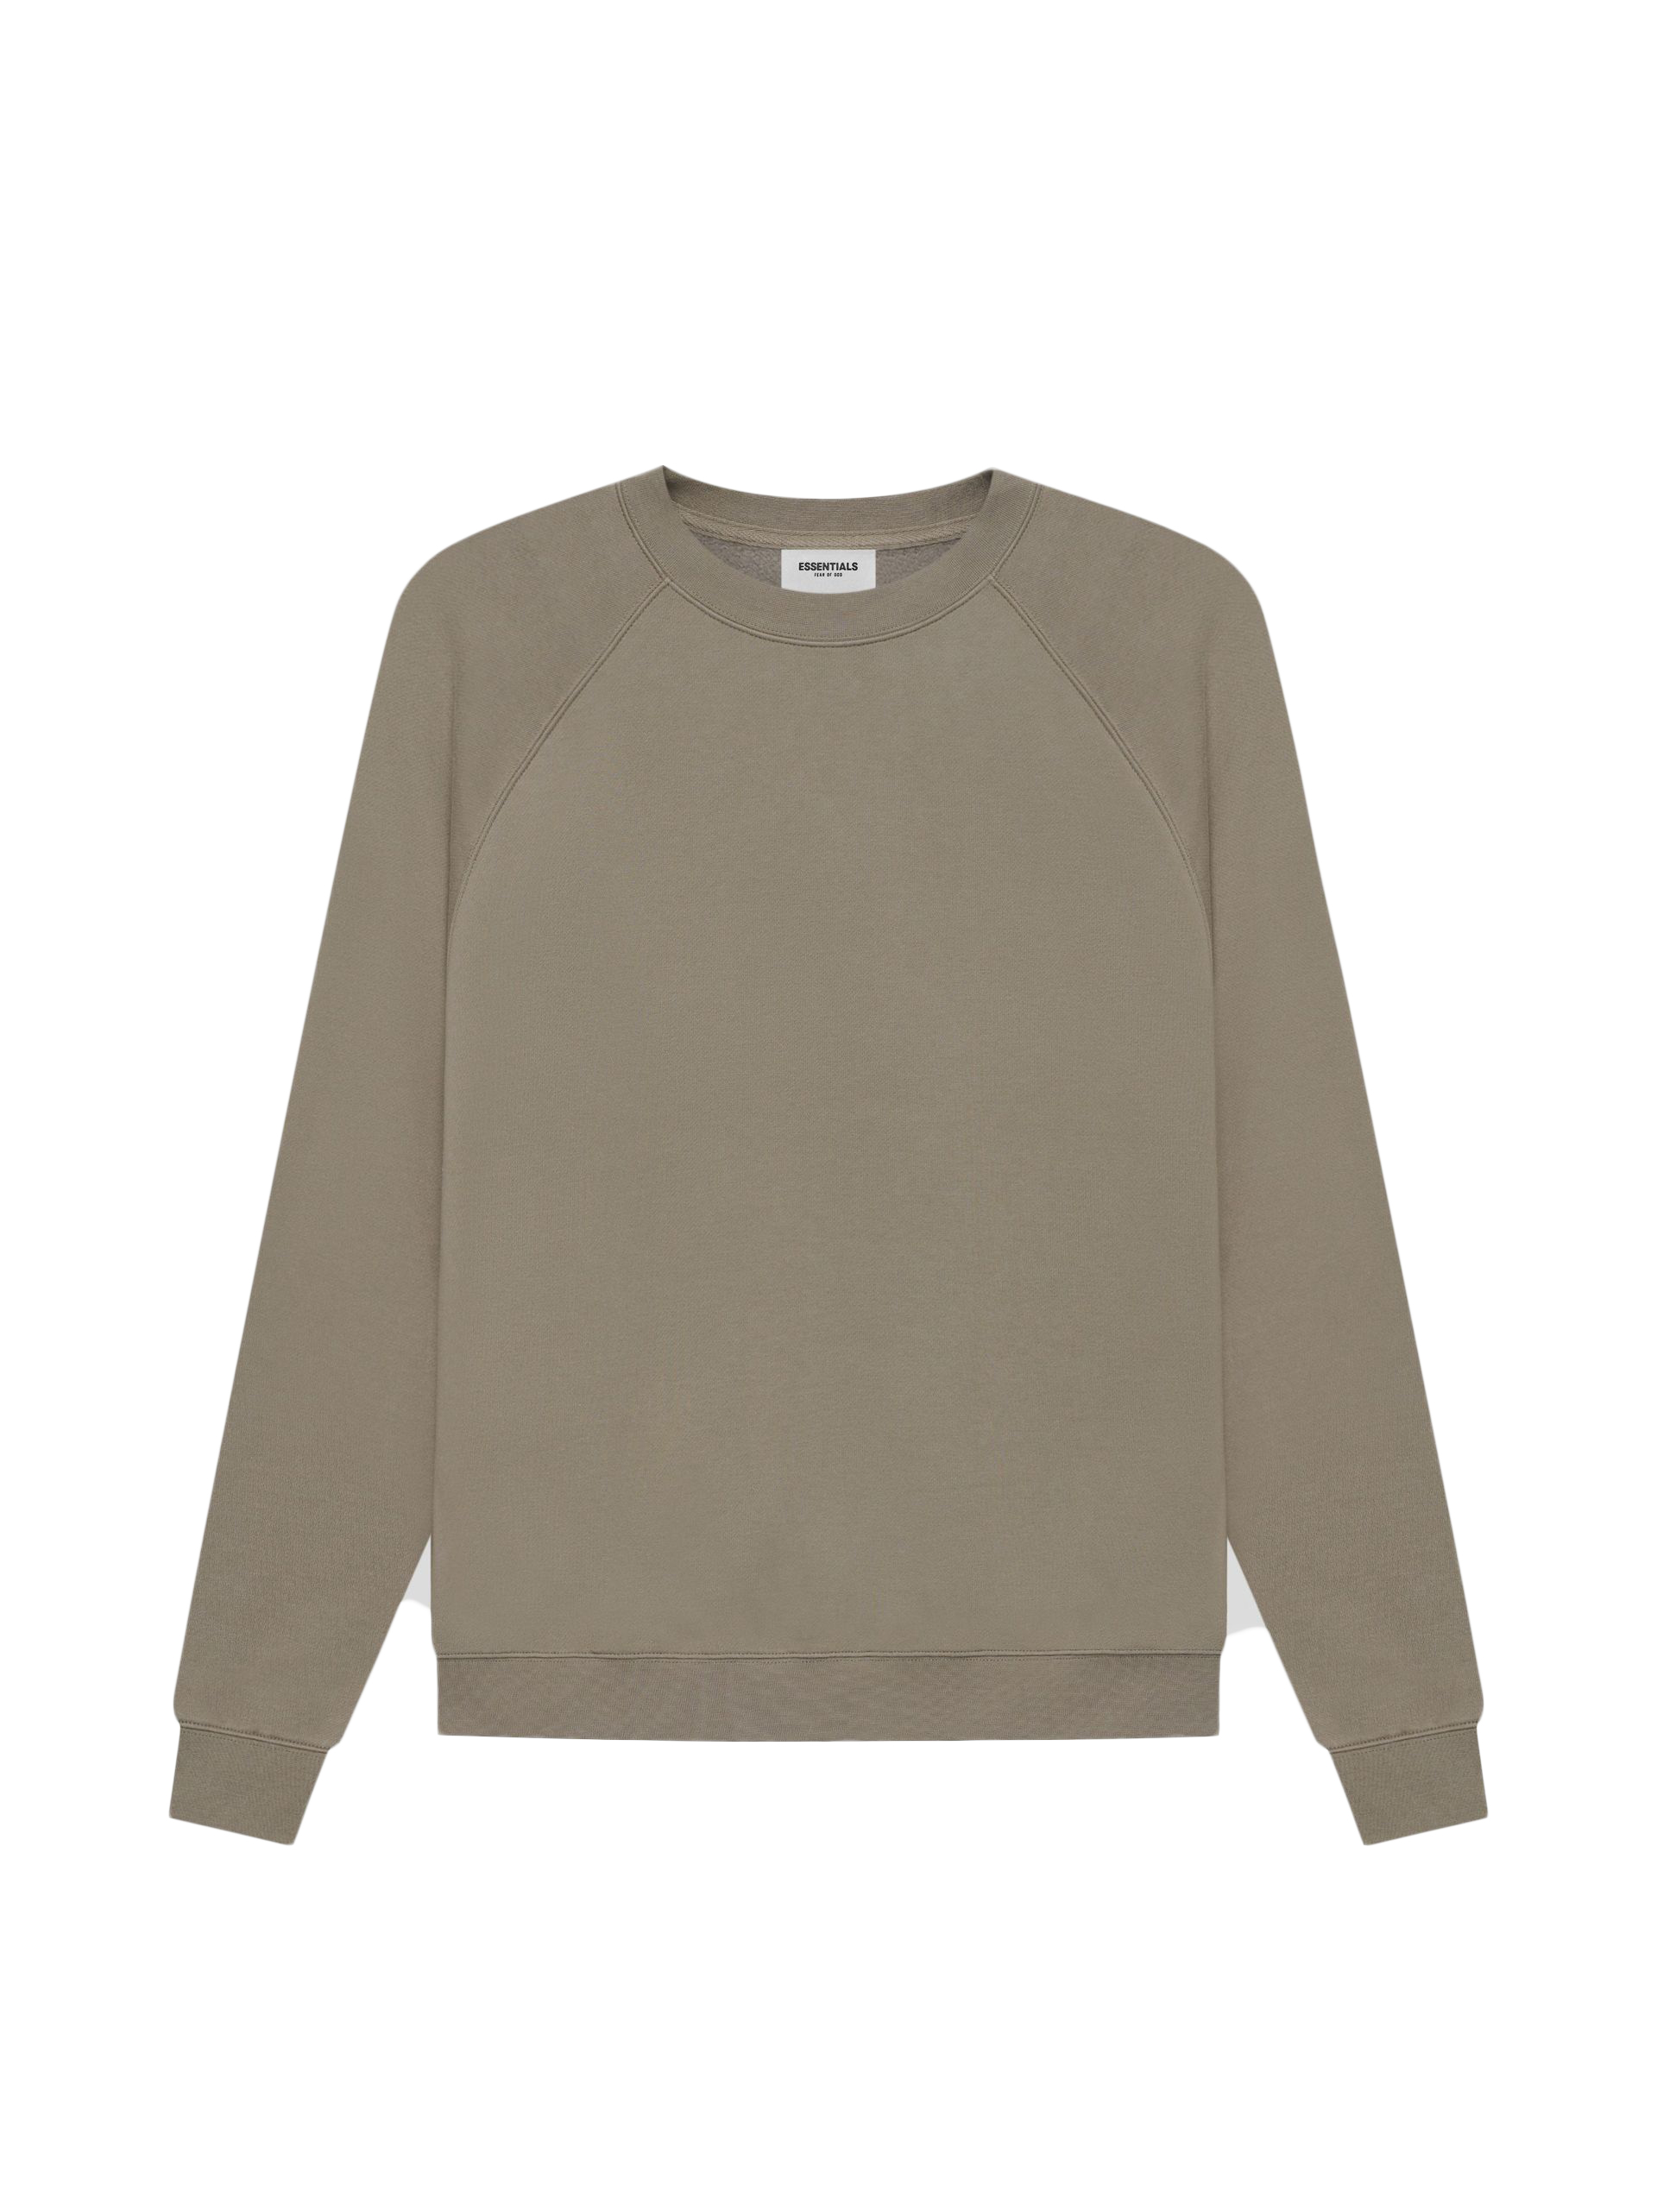 Fear of God Essentials Pull-Over Crewneck Taupe